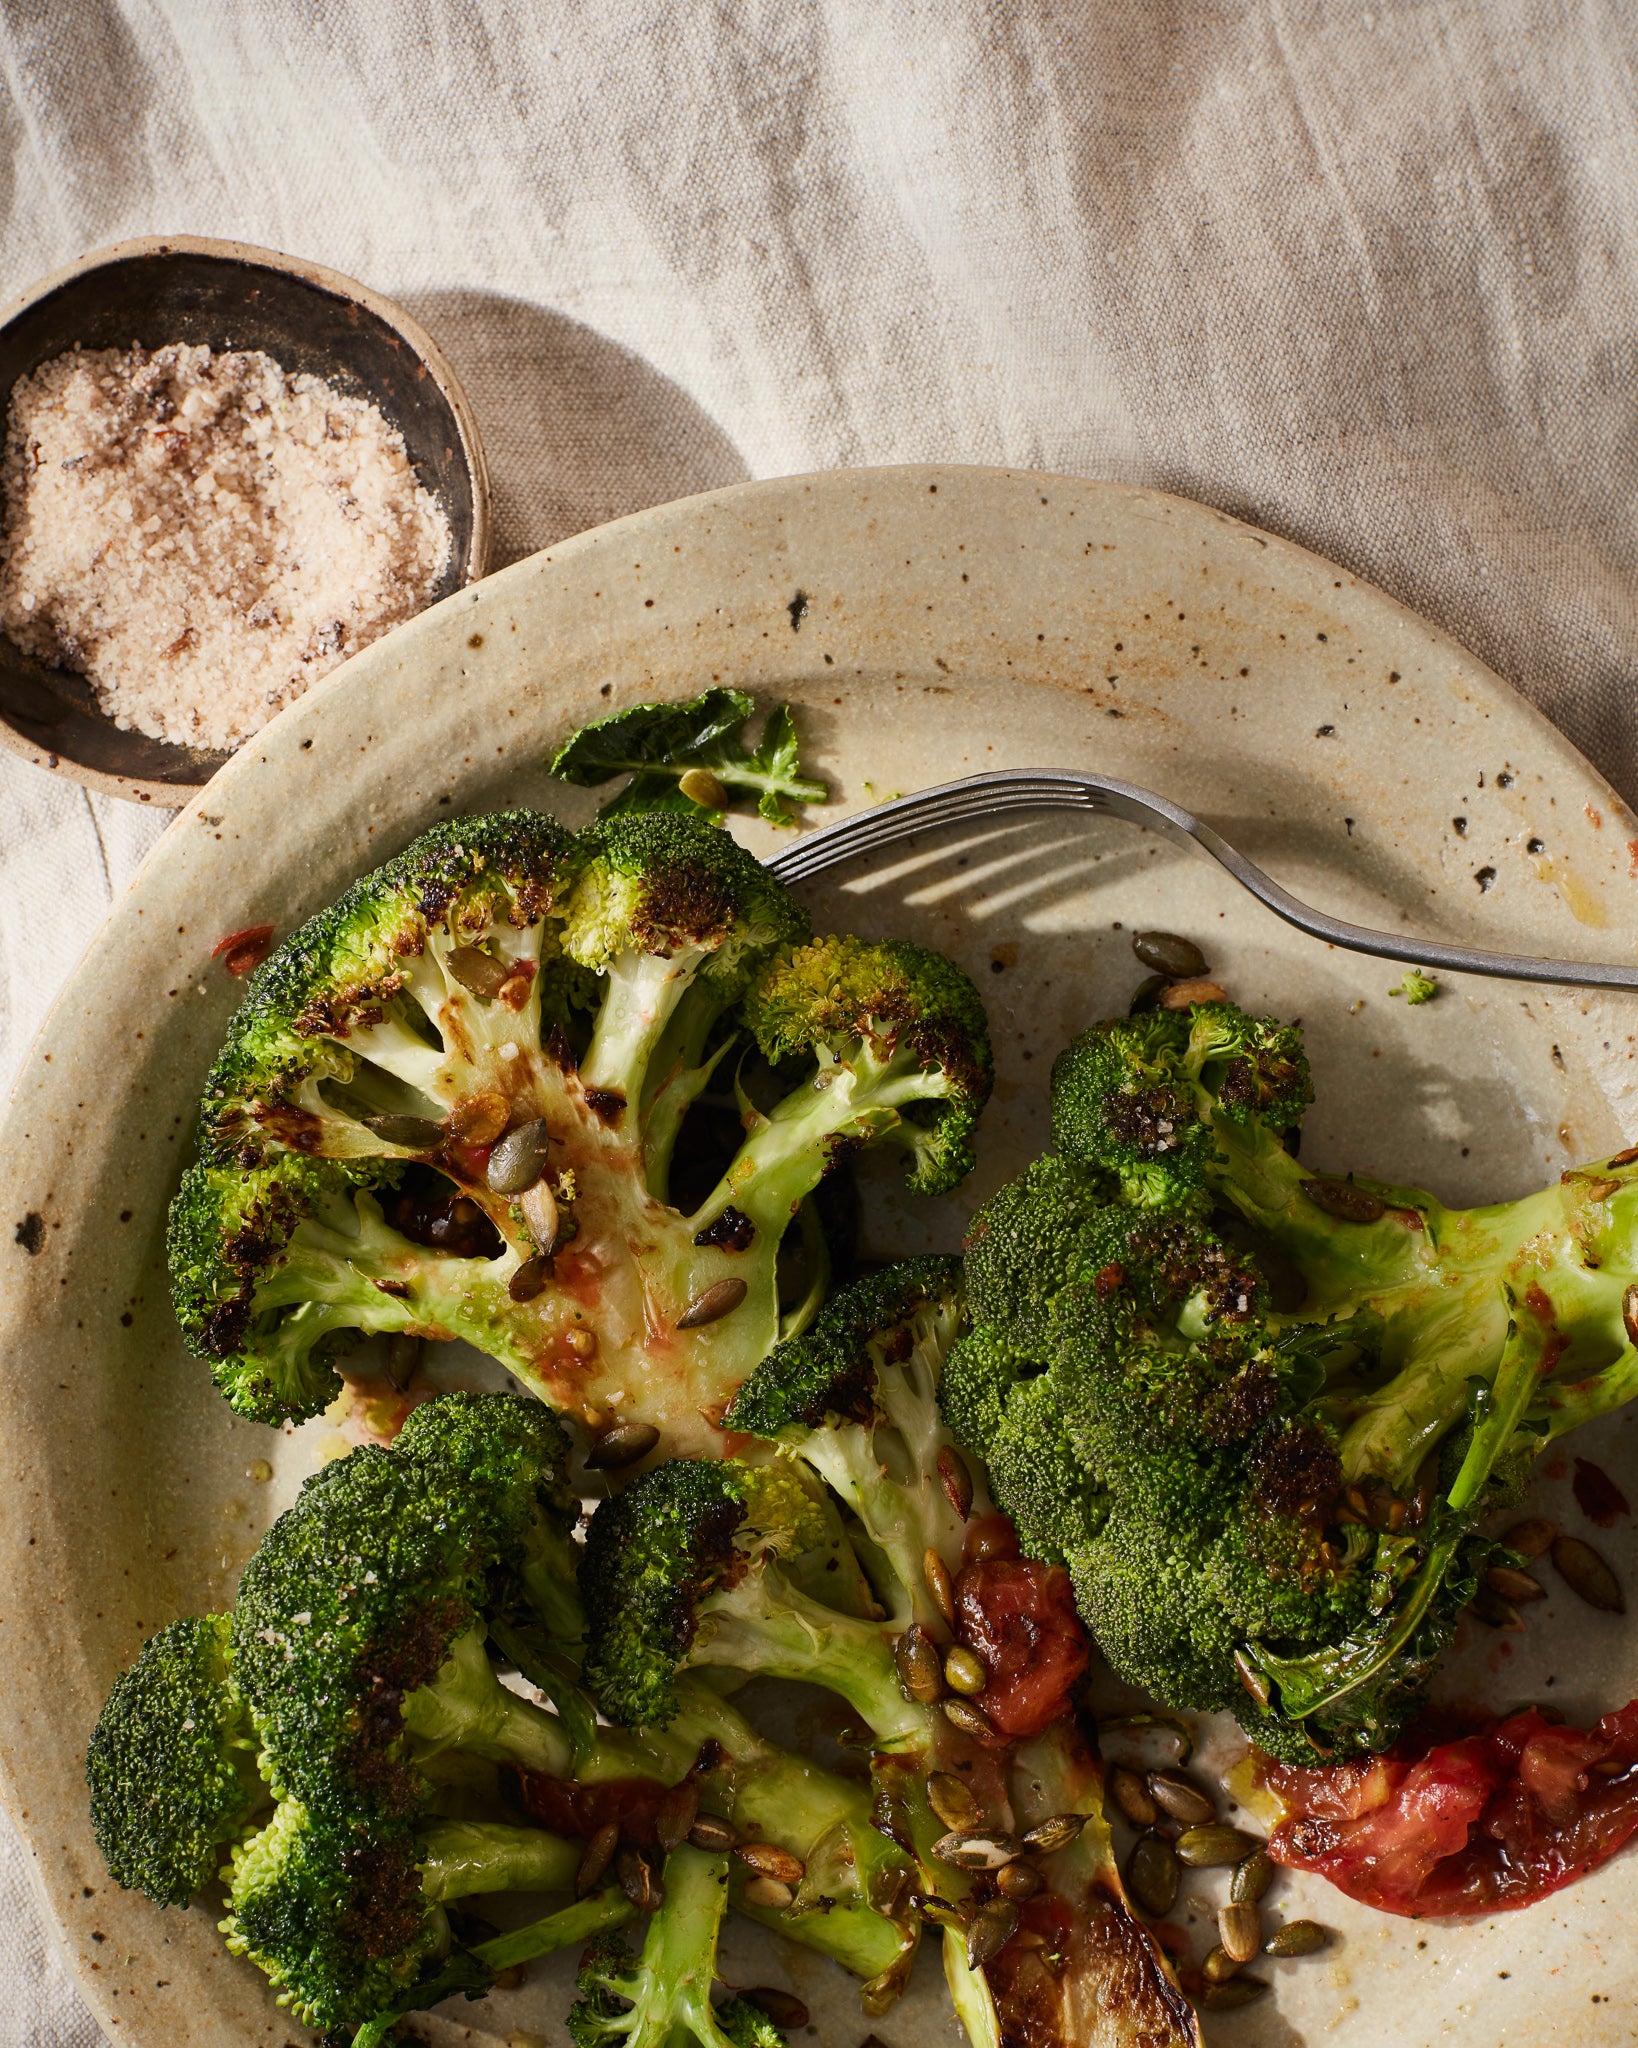 Broccoli steaks with capers and tomato sea salt